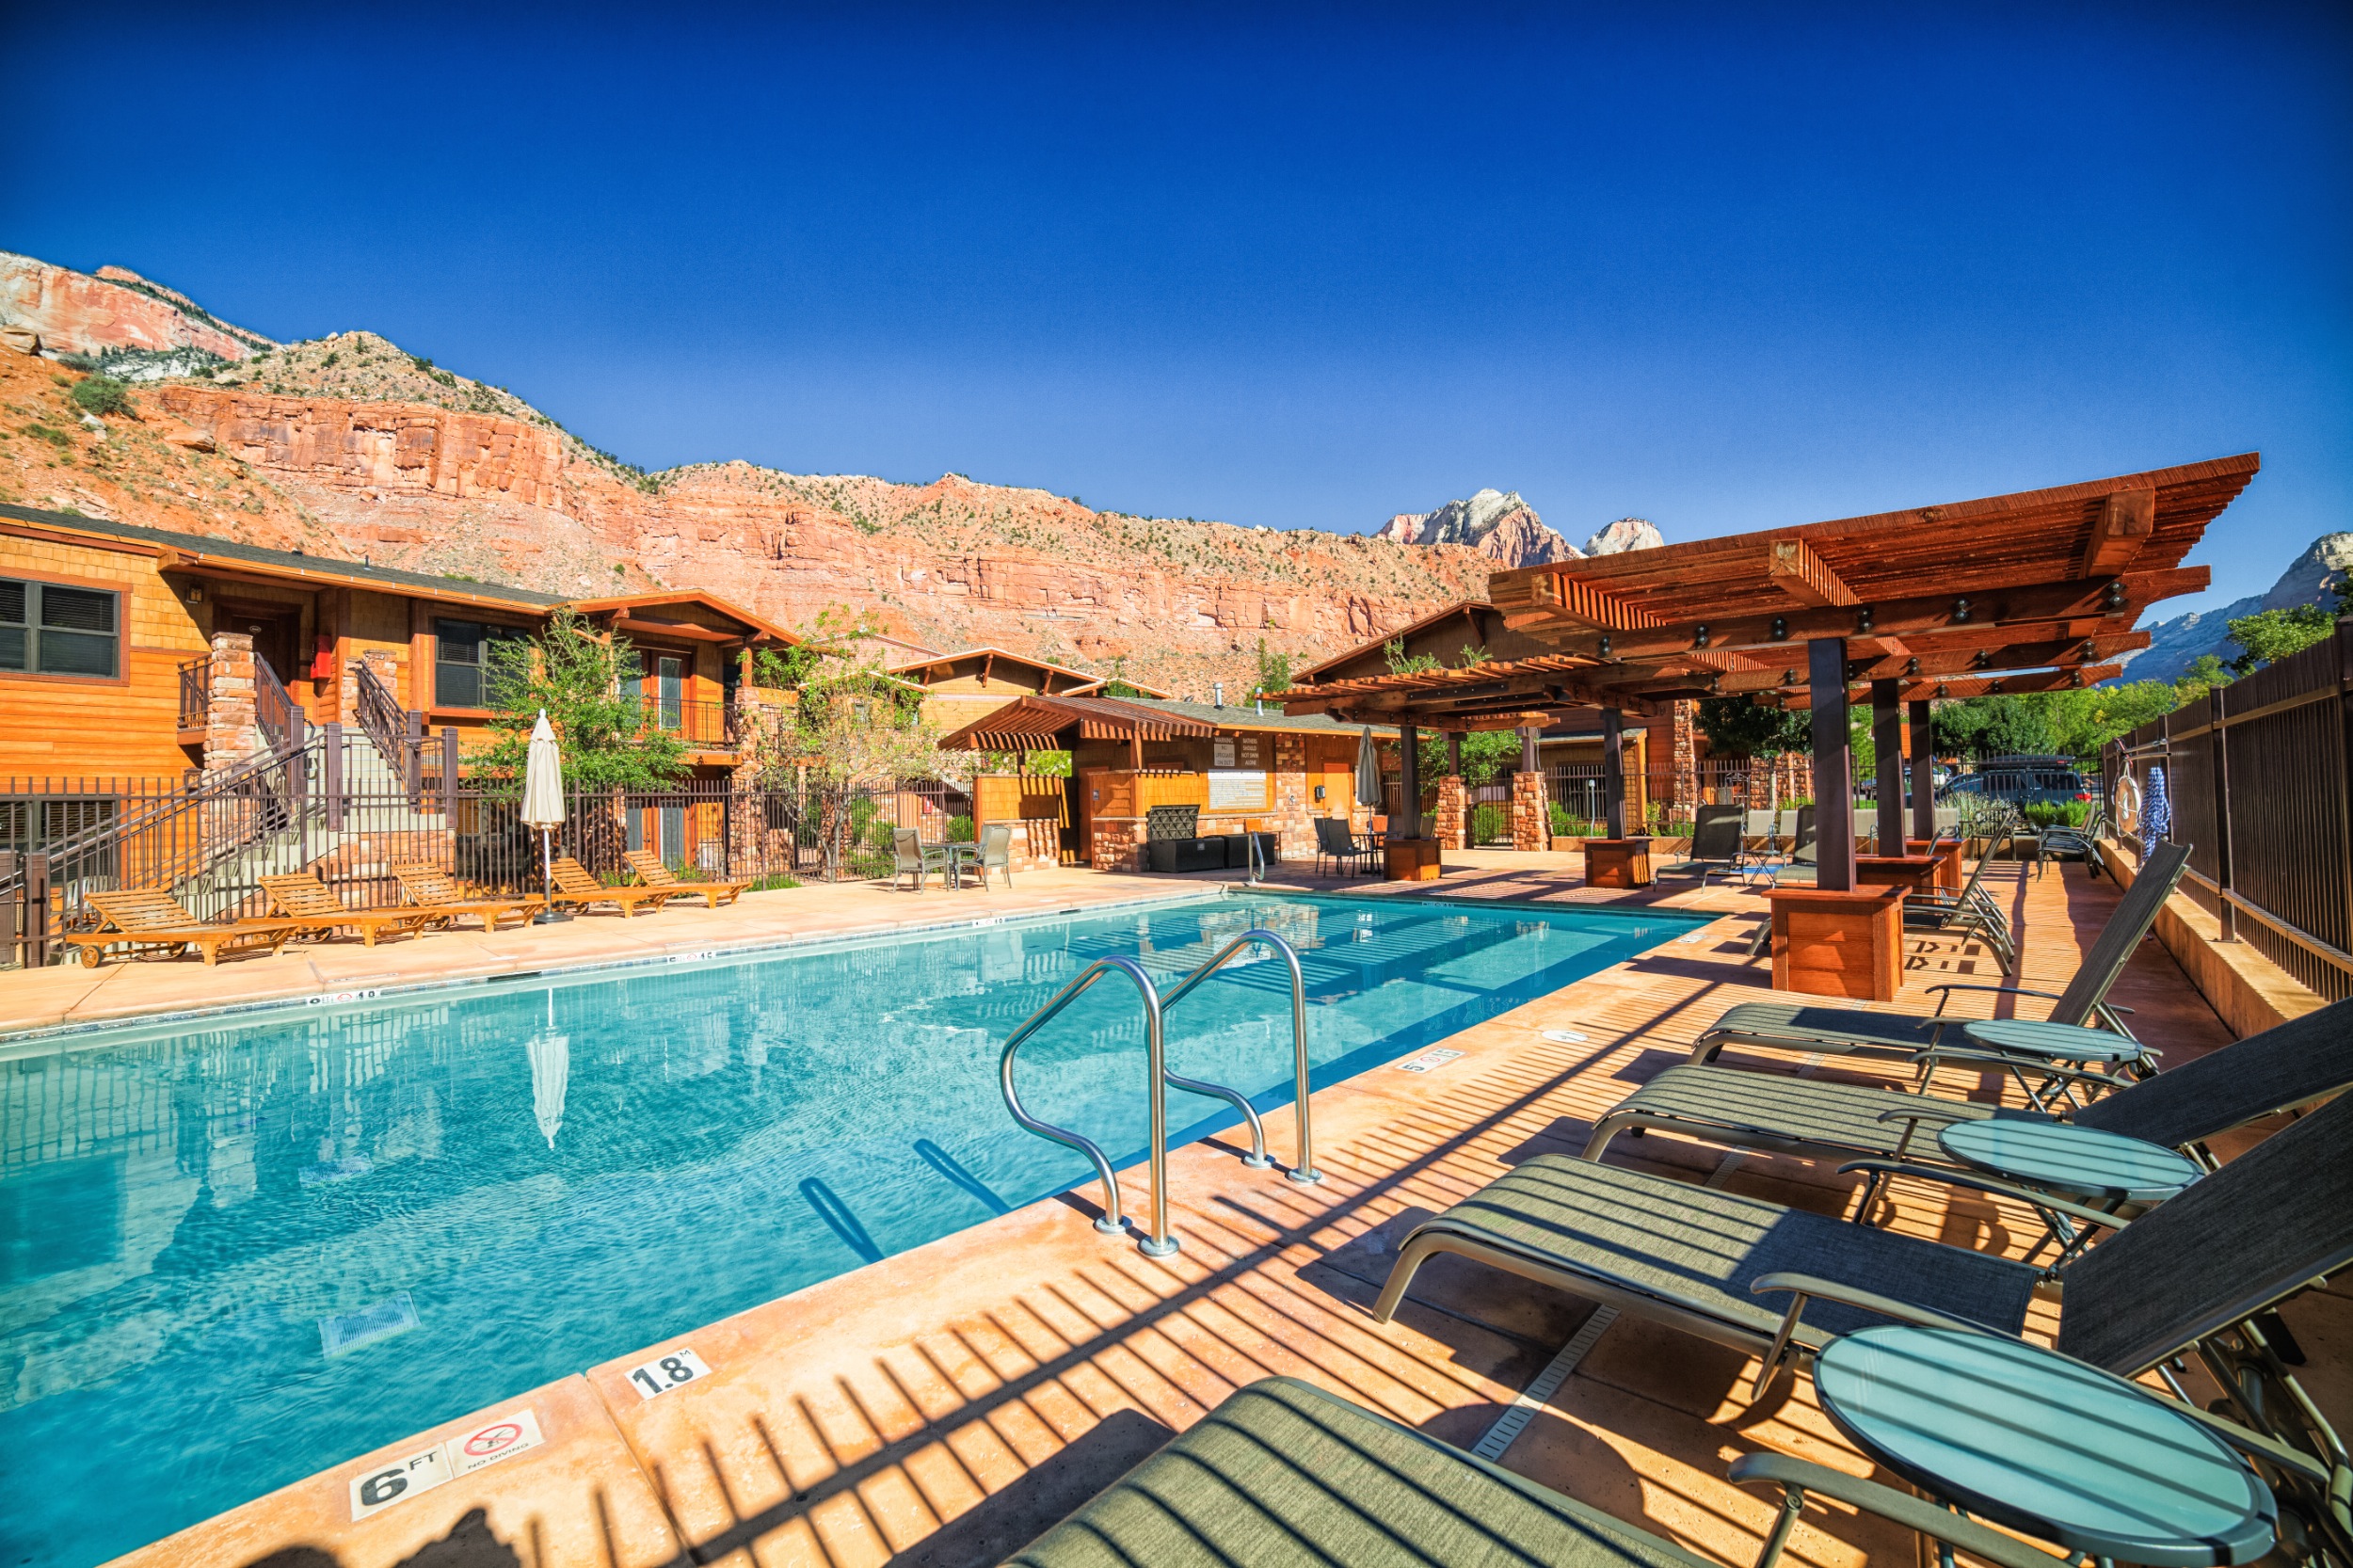 Pool & Spa | Cable Mountain Lodge at Zion National Park